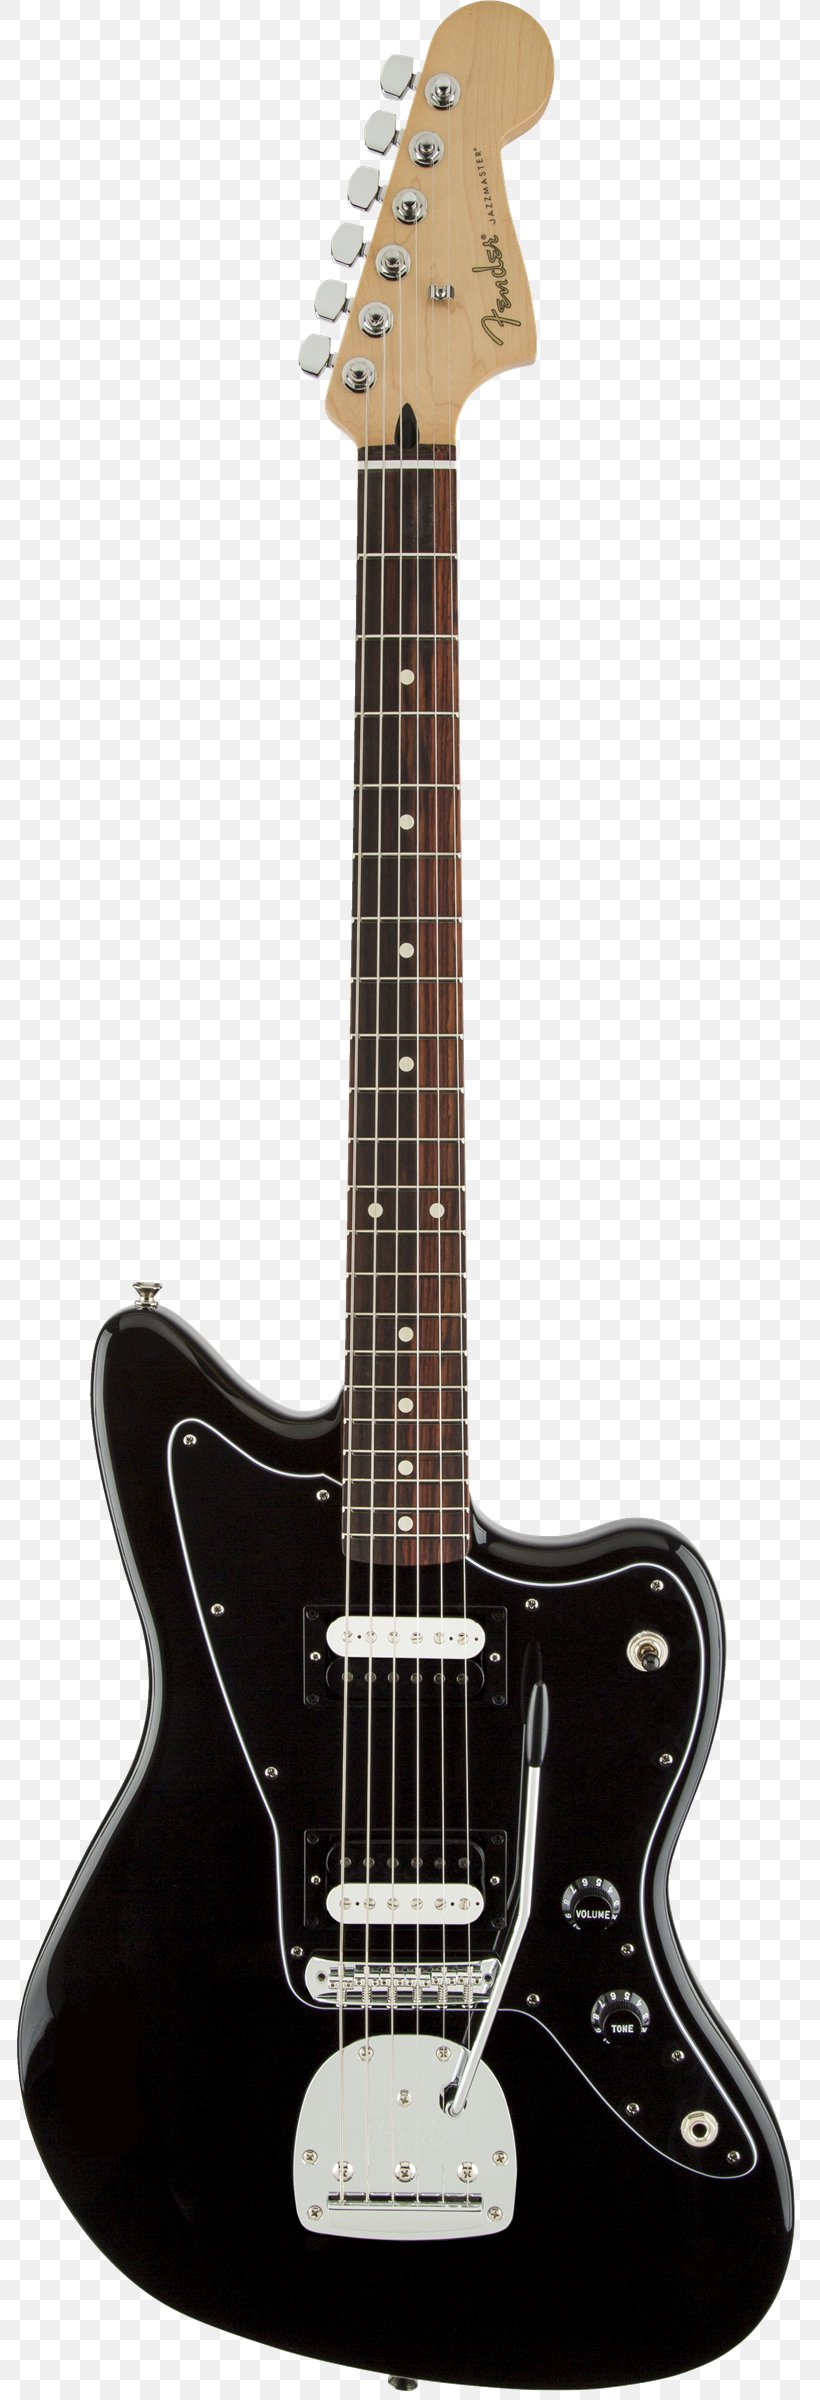 Fender Jazzmaster Squier Deluxe Hot Rails Stratocaster Guitar Squier Affinity Series Jazzmaster HH, PNG, 787x2400px, Fender Jazzmaster, Acoustic Electric Guitar, Acoustic Guitar, Bass Guitar, Electric Guitar Download Free